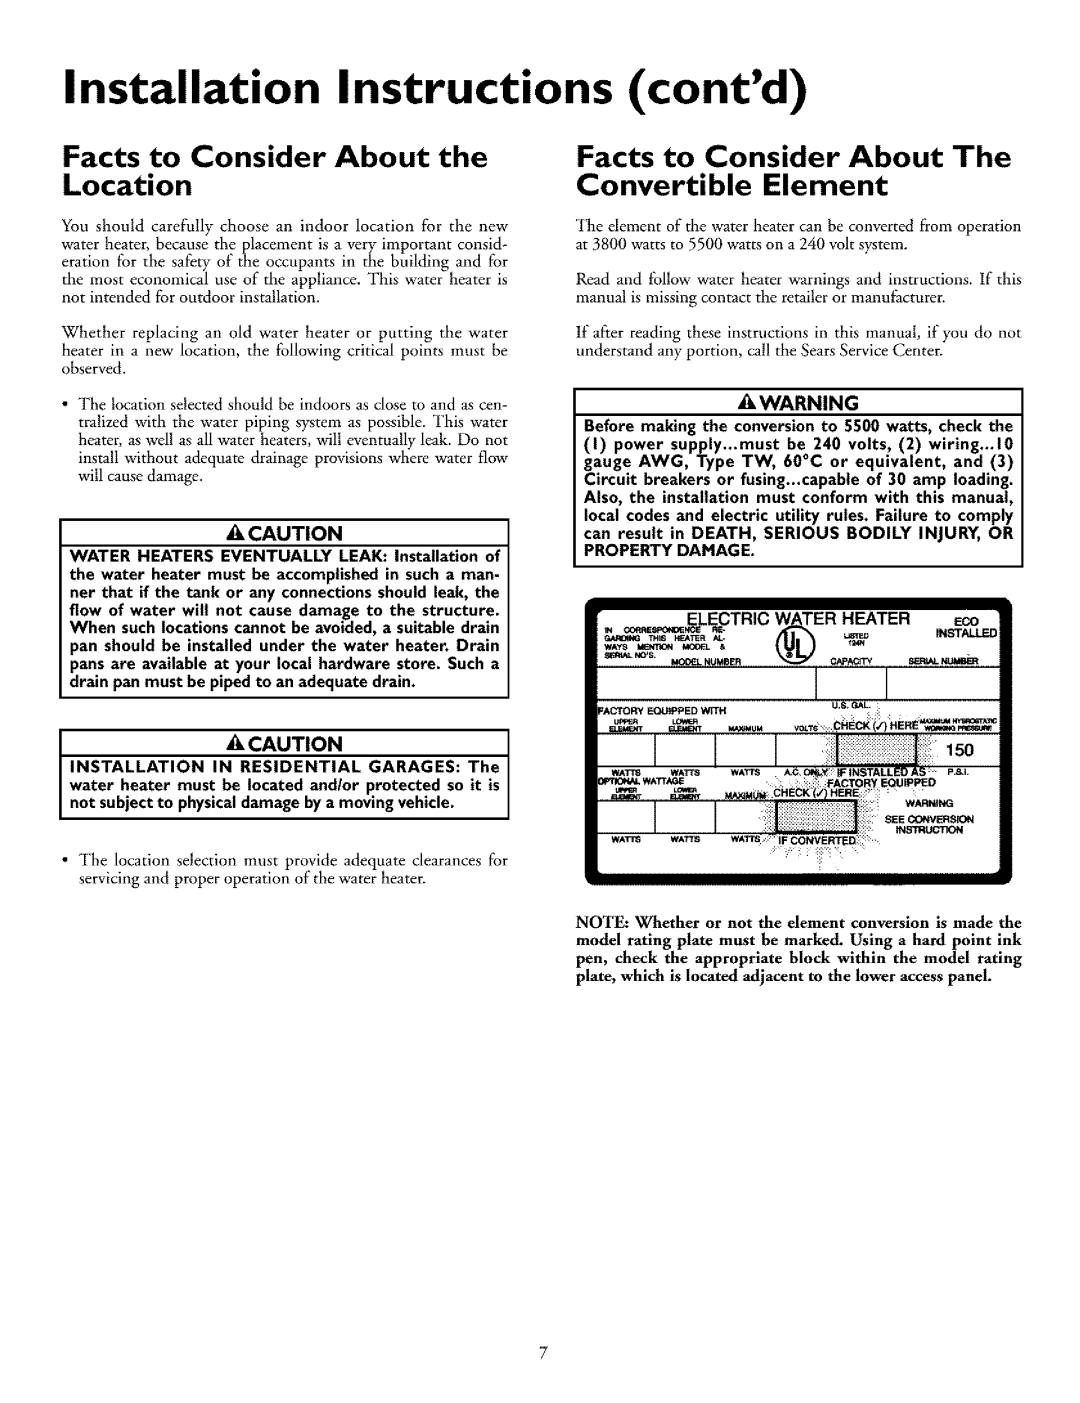 Kenmore 153.318031, 153.318131 owner manual Installation Instructions contd, Facts to Consider About the Location, Acaution 